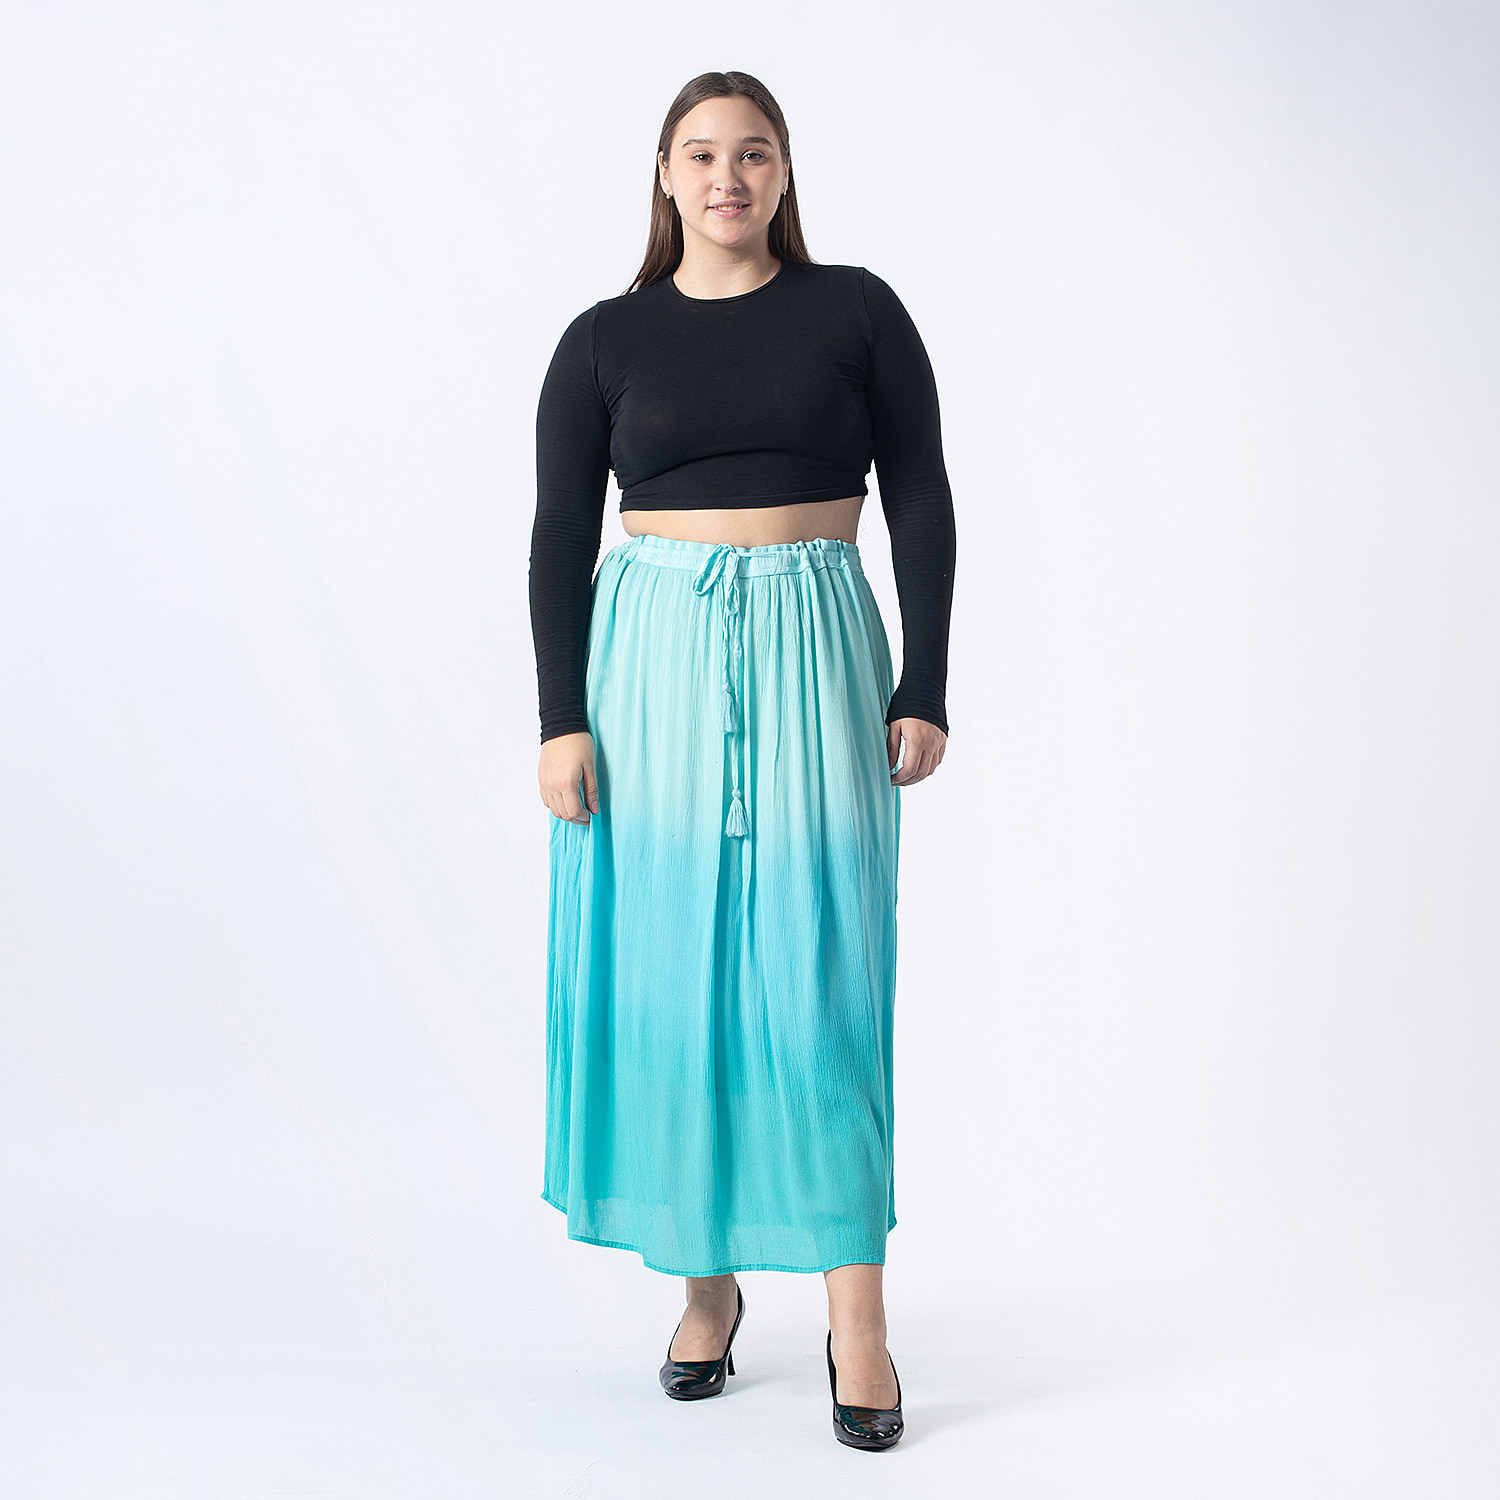 Tamsy-Viscose-Lined-Skirt-Size-85x1-cm-Turquoise-Turquoise